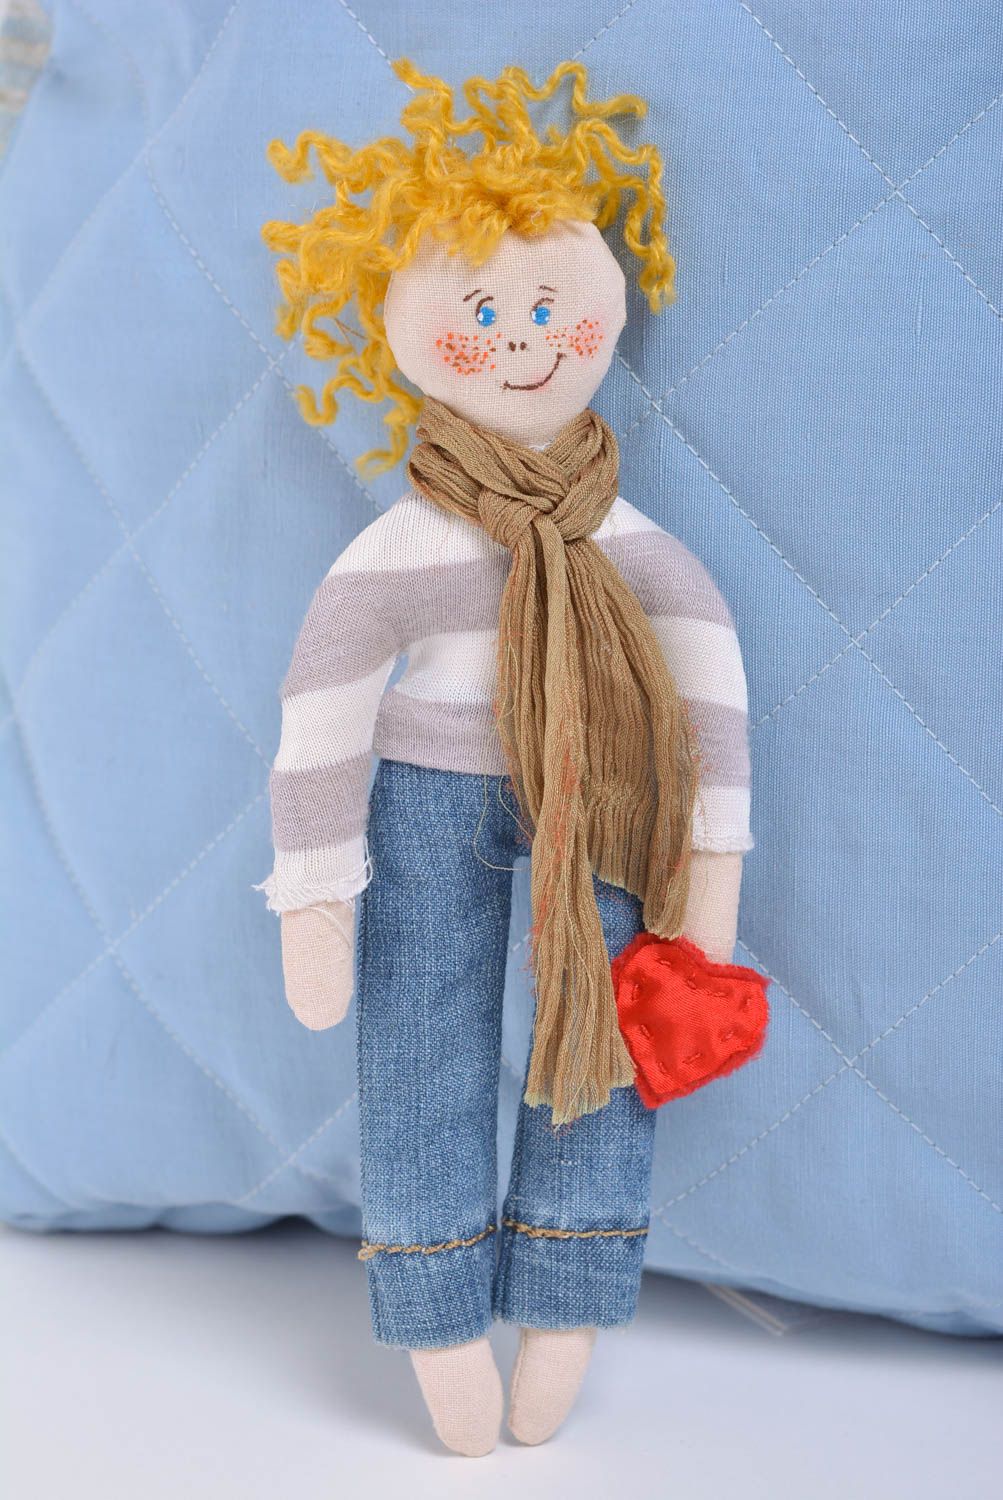 Handmade designer interior fabric soft toy boy with light curly hair in sweater photo 1